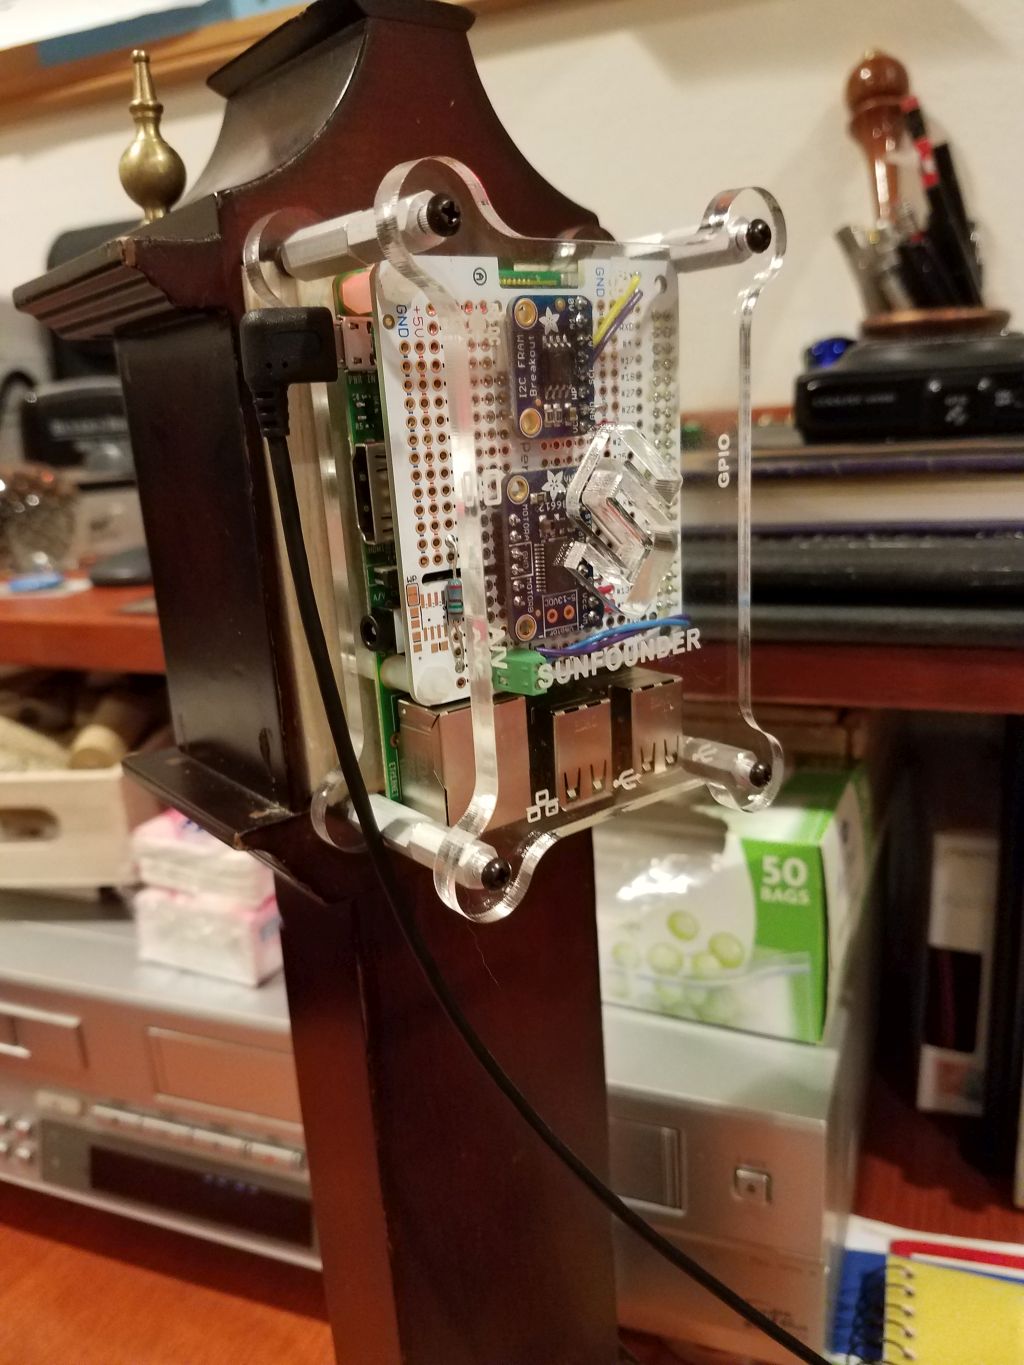 Pi mounted on the back of the clock